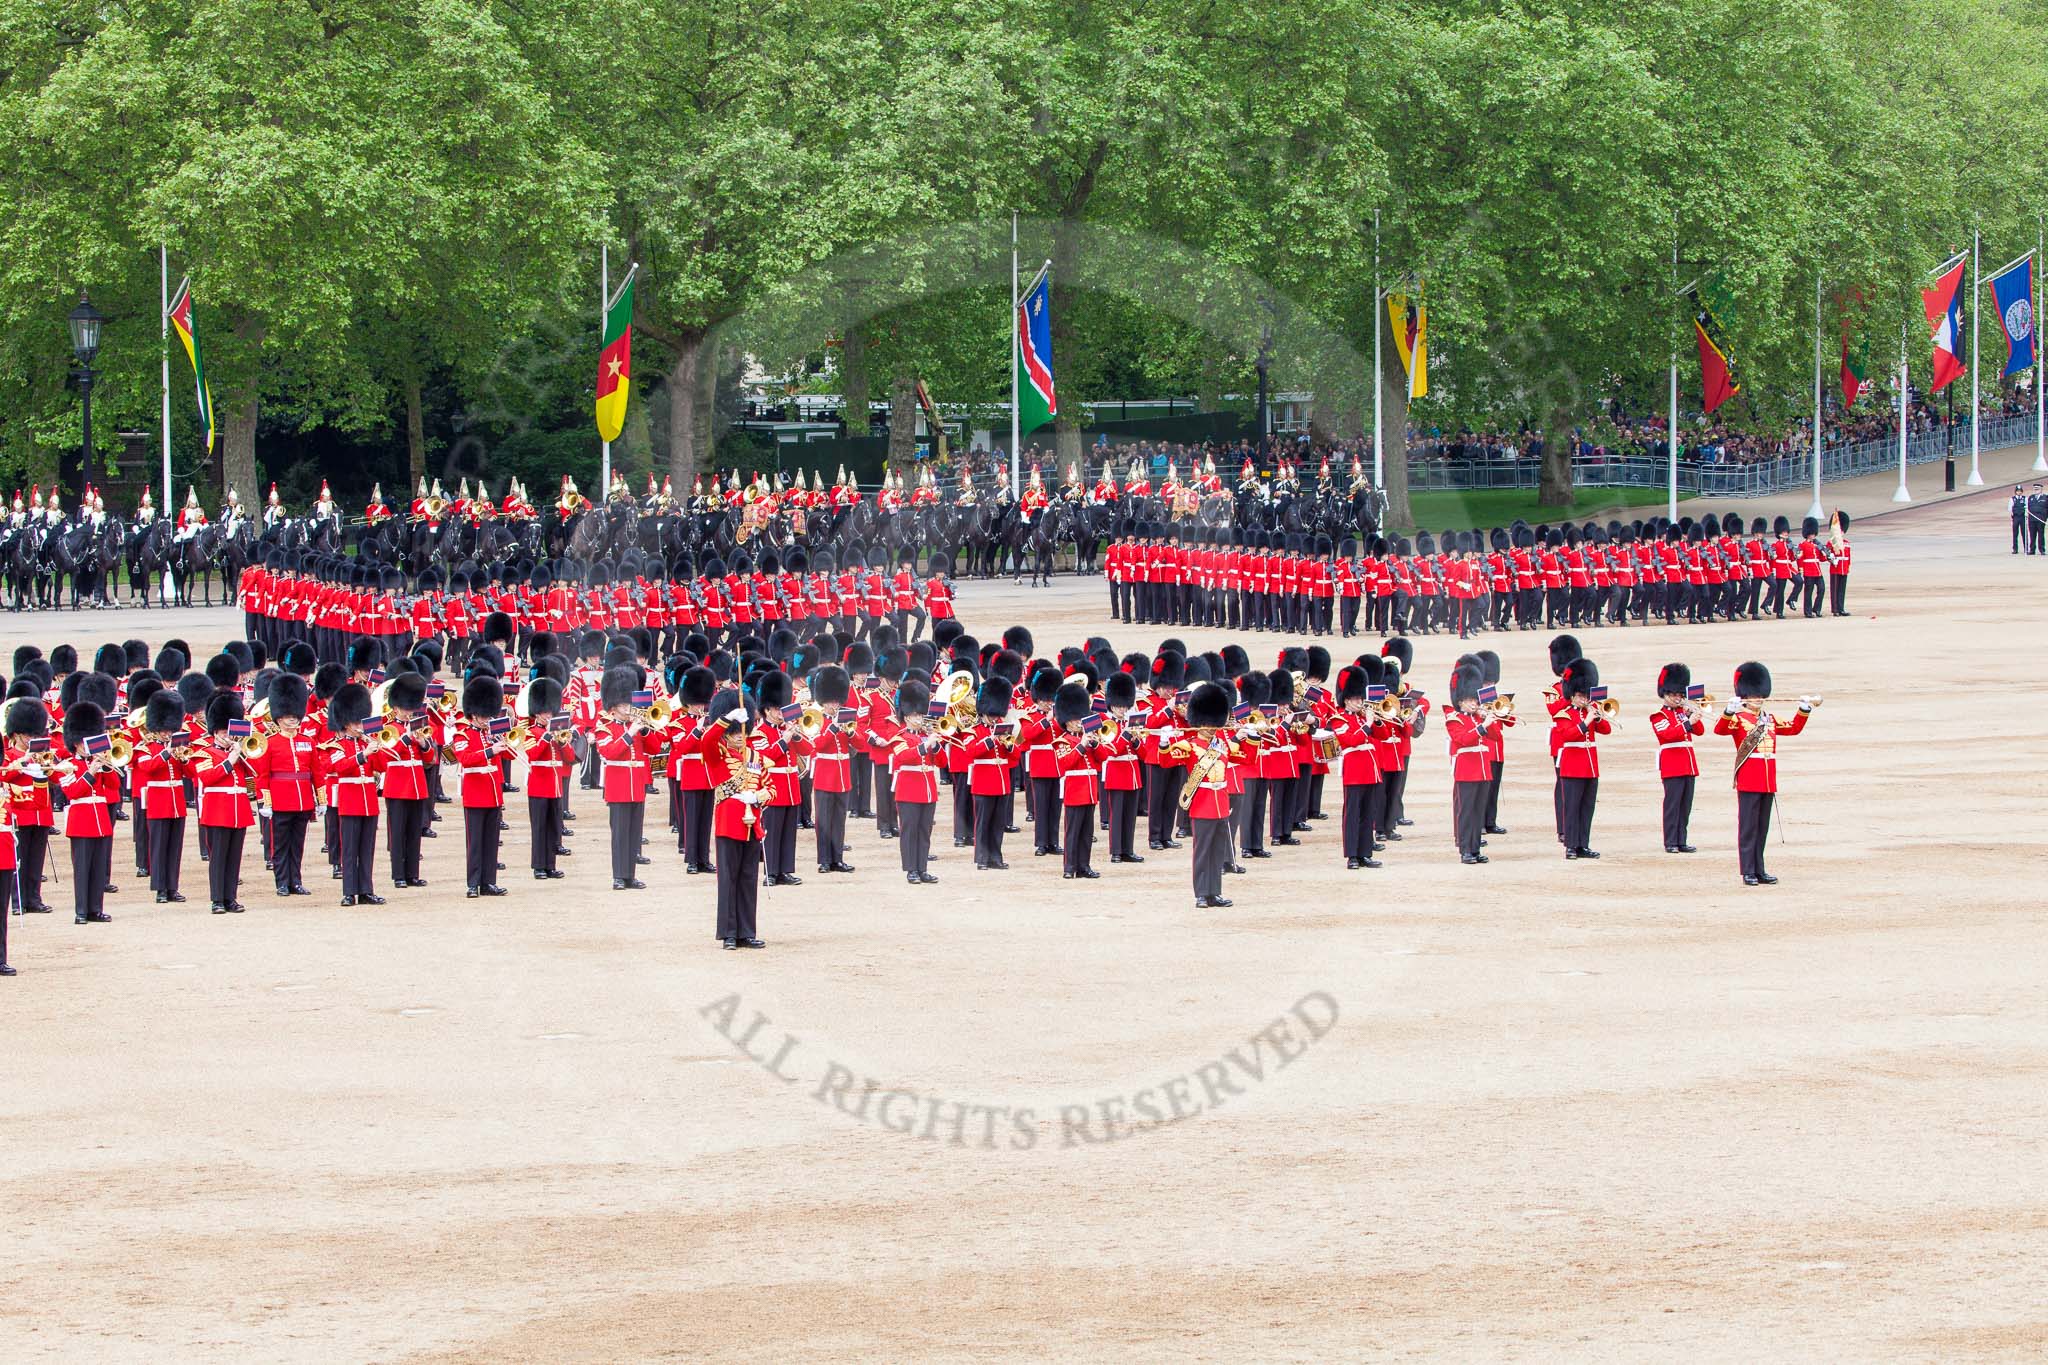 Major General's Review 2013: At the end of the March Past in Quick Time, all five guards on the northern side of Horse Guards Parade peform a ninety-degree-turn at the same time..
Horse Guards Parade, Westminster,
London SW1,

United Kingdom,
on 01 June 2013 at 11:47, image #558